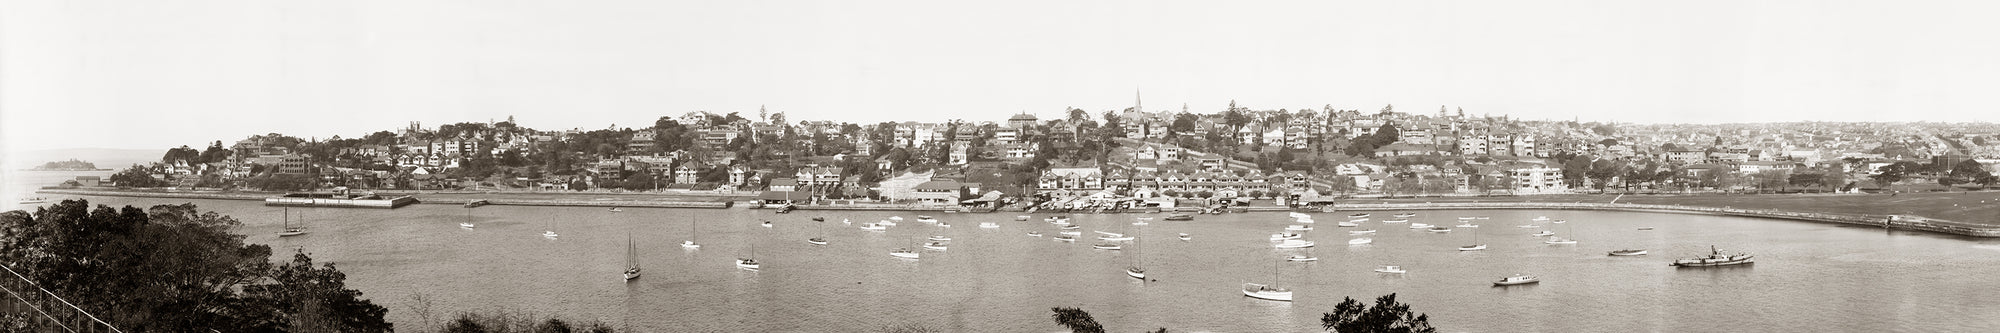 The Bay, Darling Point And Rushcutters Bay NSW Australia 1920s